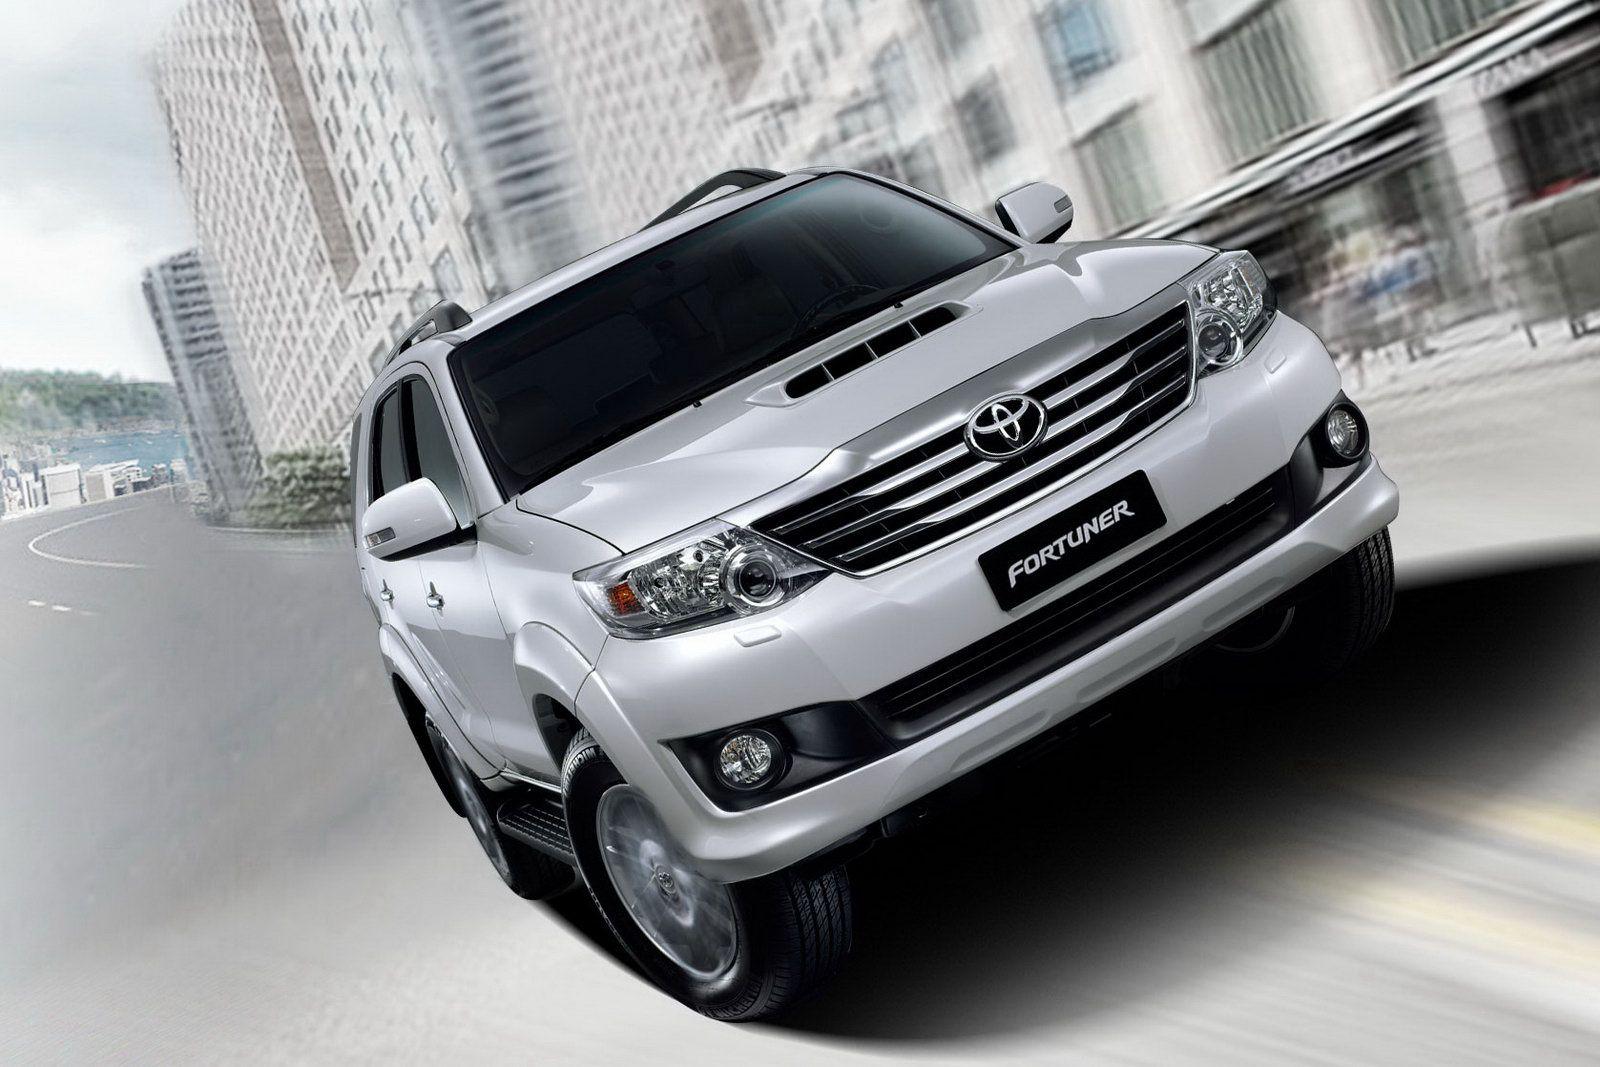 Toyota Fortuner Wallpaper For Iphone